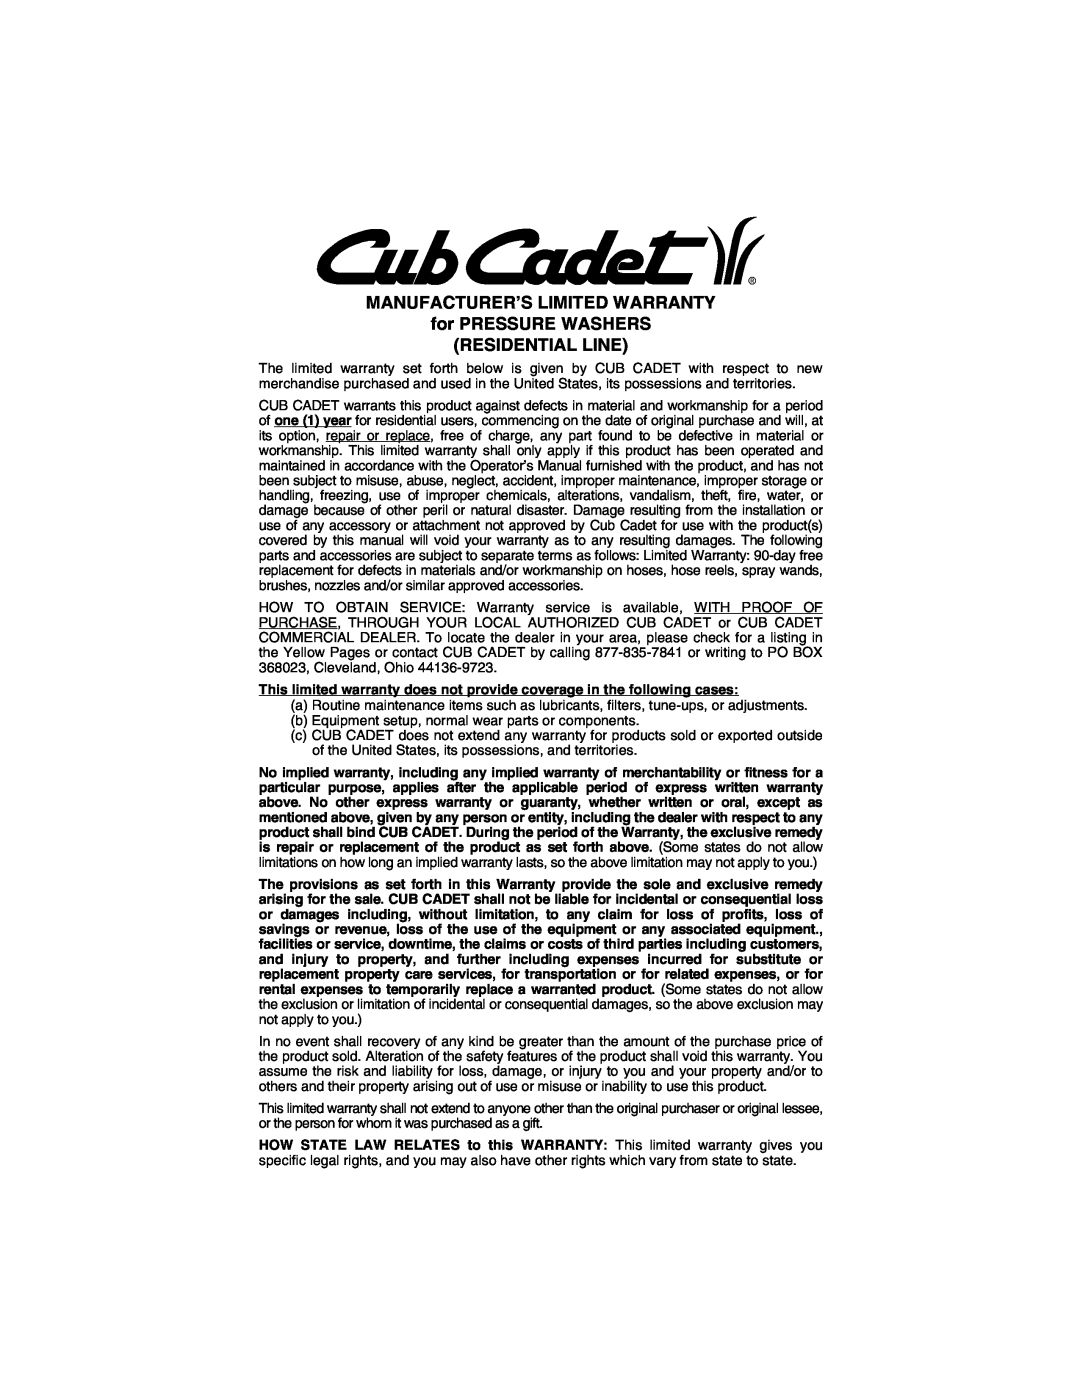 Cub Cadet 2200H manual Manufacturer’S Limited Warranty, for PRESSURE WASHERS RESIDENTIAL LINE 